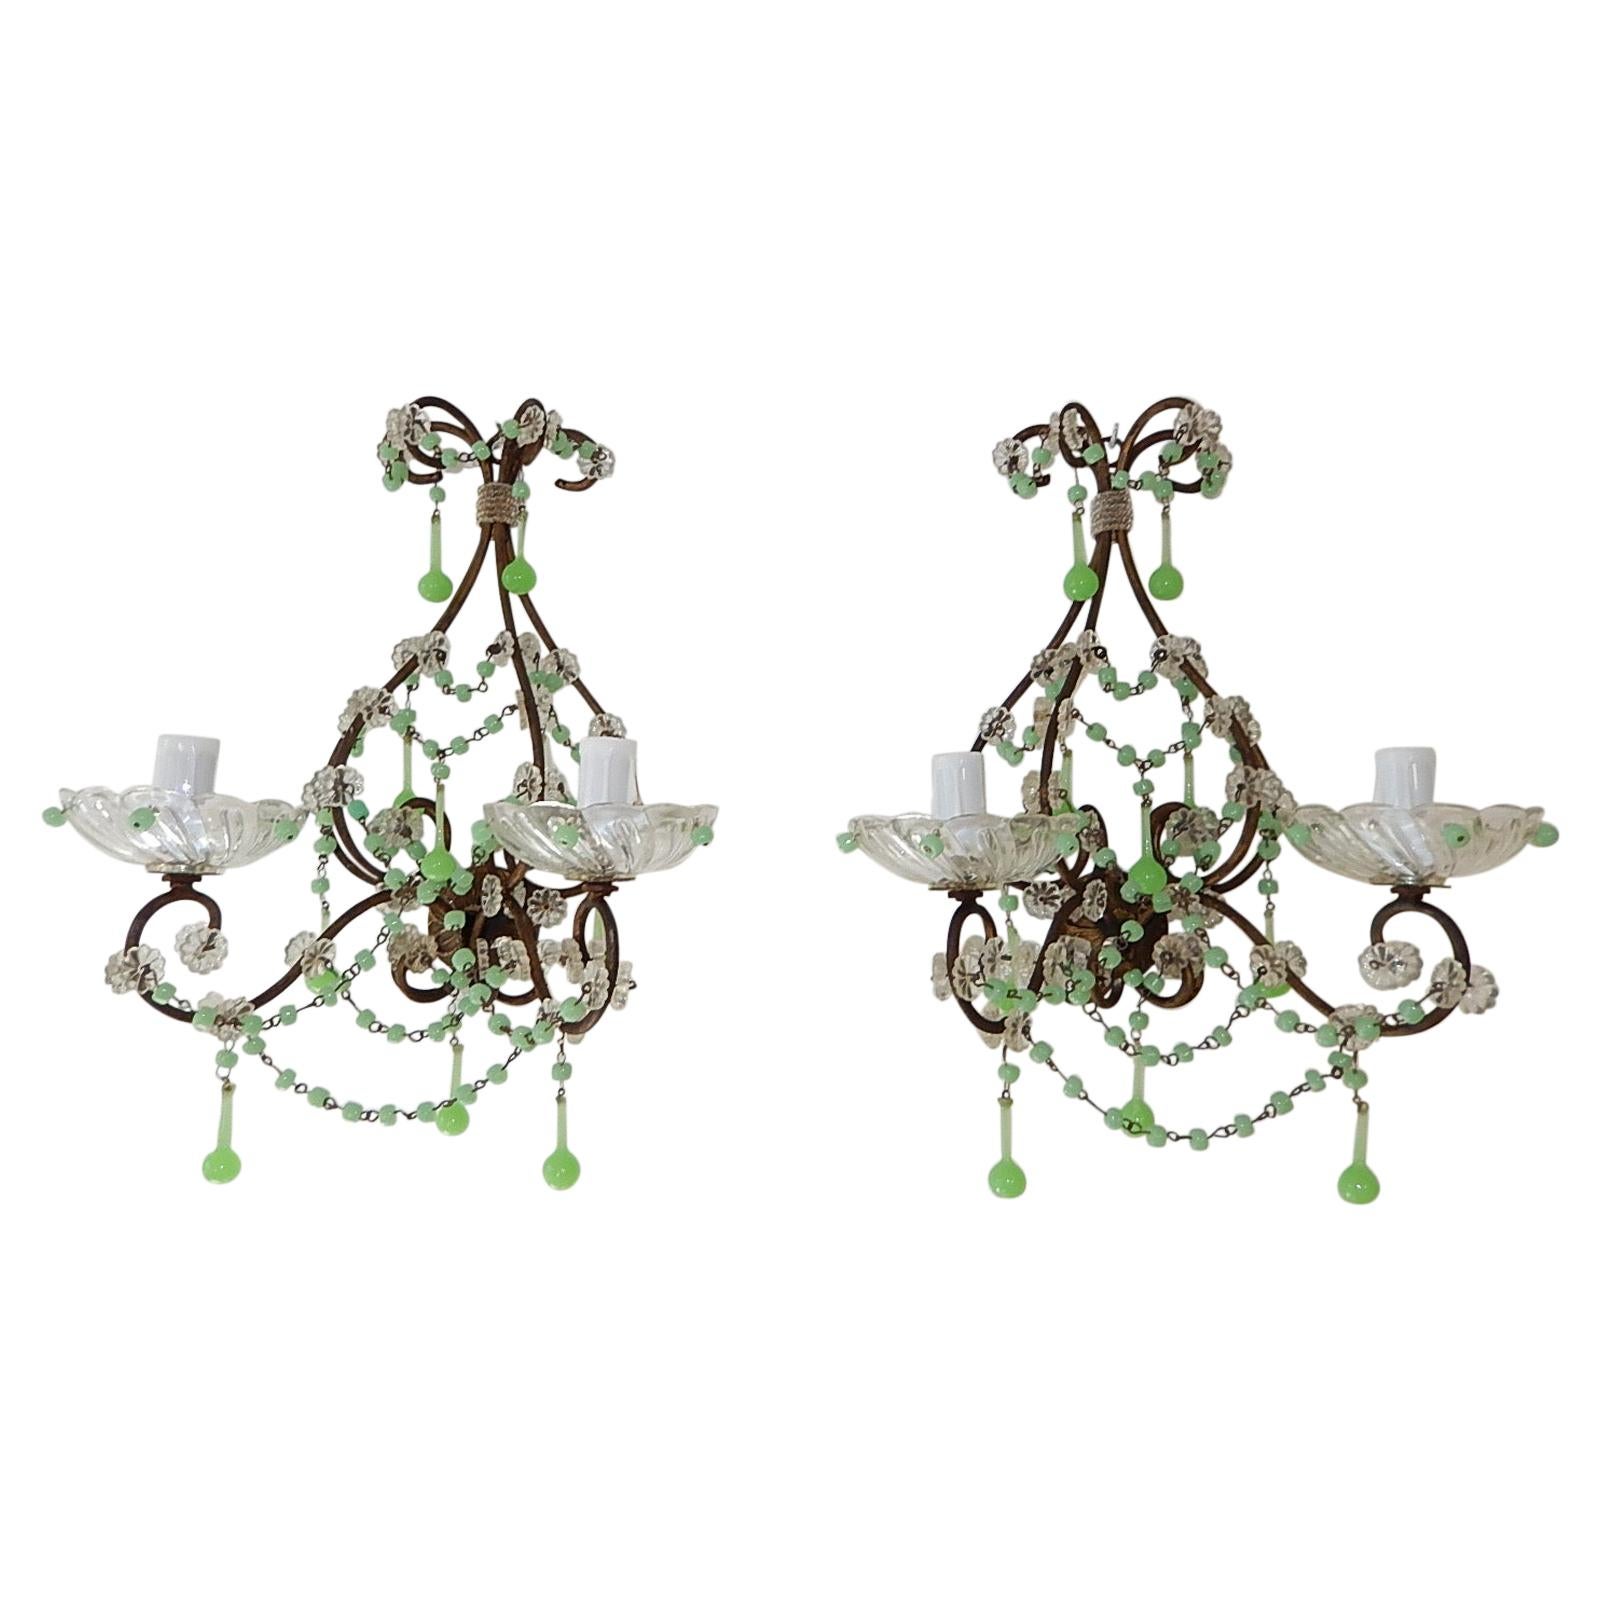 French Rare One of a Kind Green Opaline Sconces, circa 1920